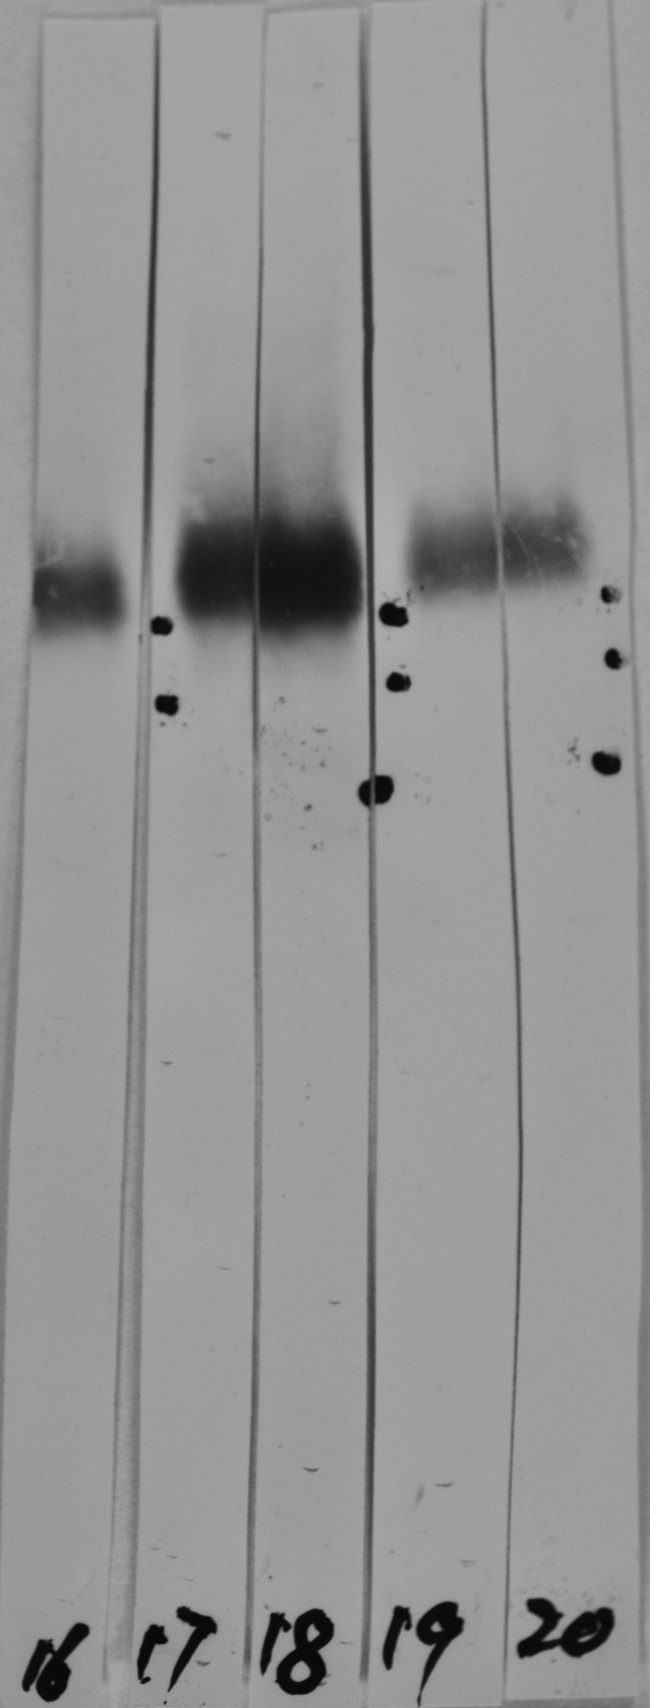 LAMP1 / CD107a Antibody - Western strip blots of HeLa cell crude extracts with two different preparations of CD107a / LAMP1 antibody in strips 17 and 18. Both preparations bind to a diffuse band running at between ~90kDa and ~120kDa as expected, and show no appreciably cross reactivity with any other protein.